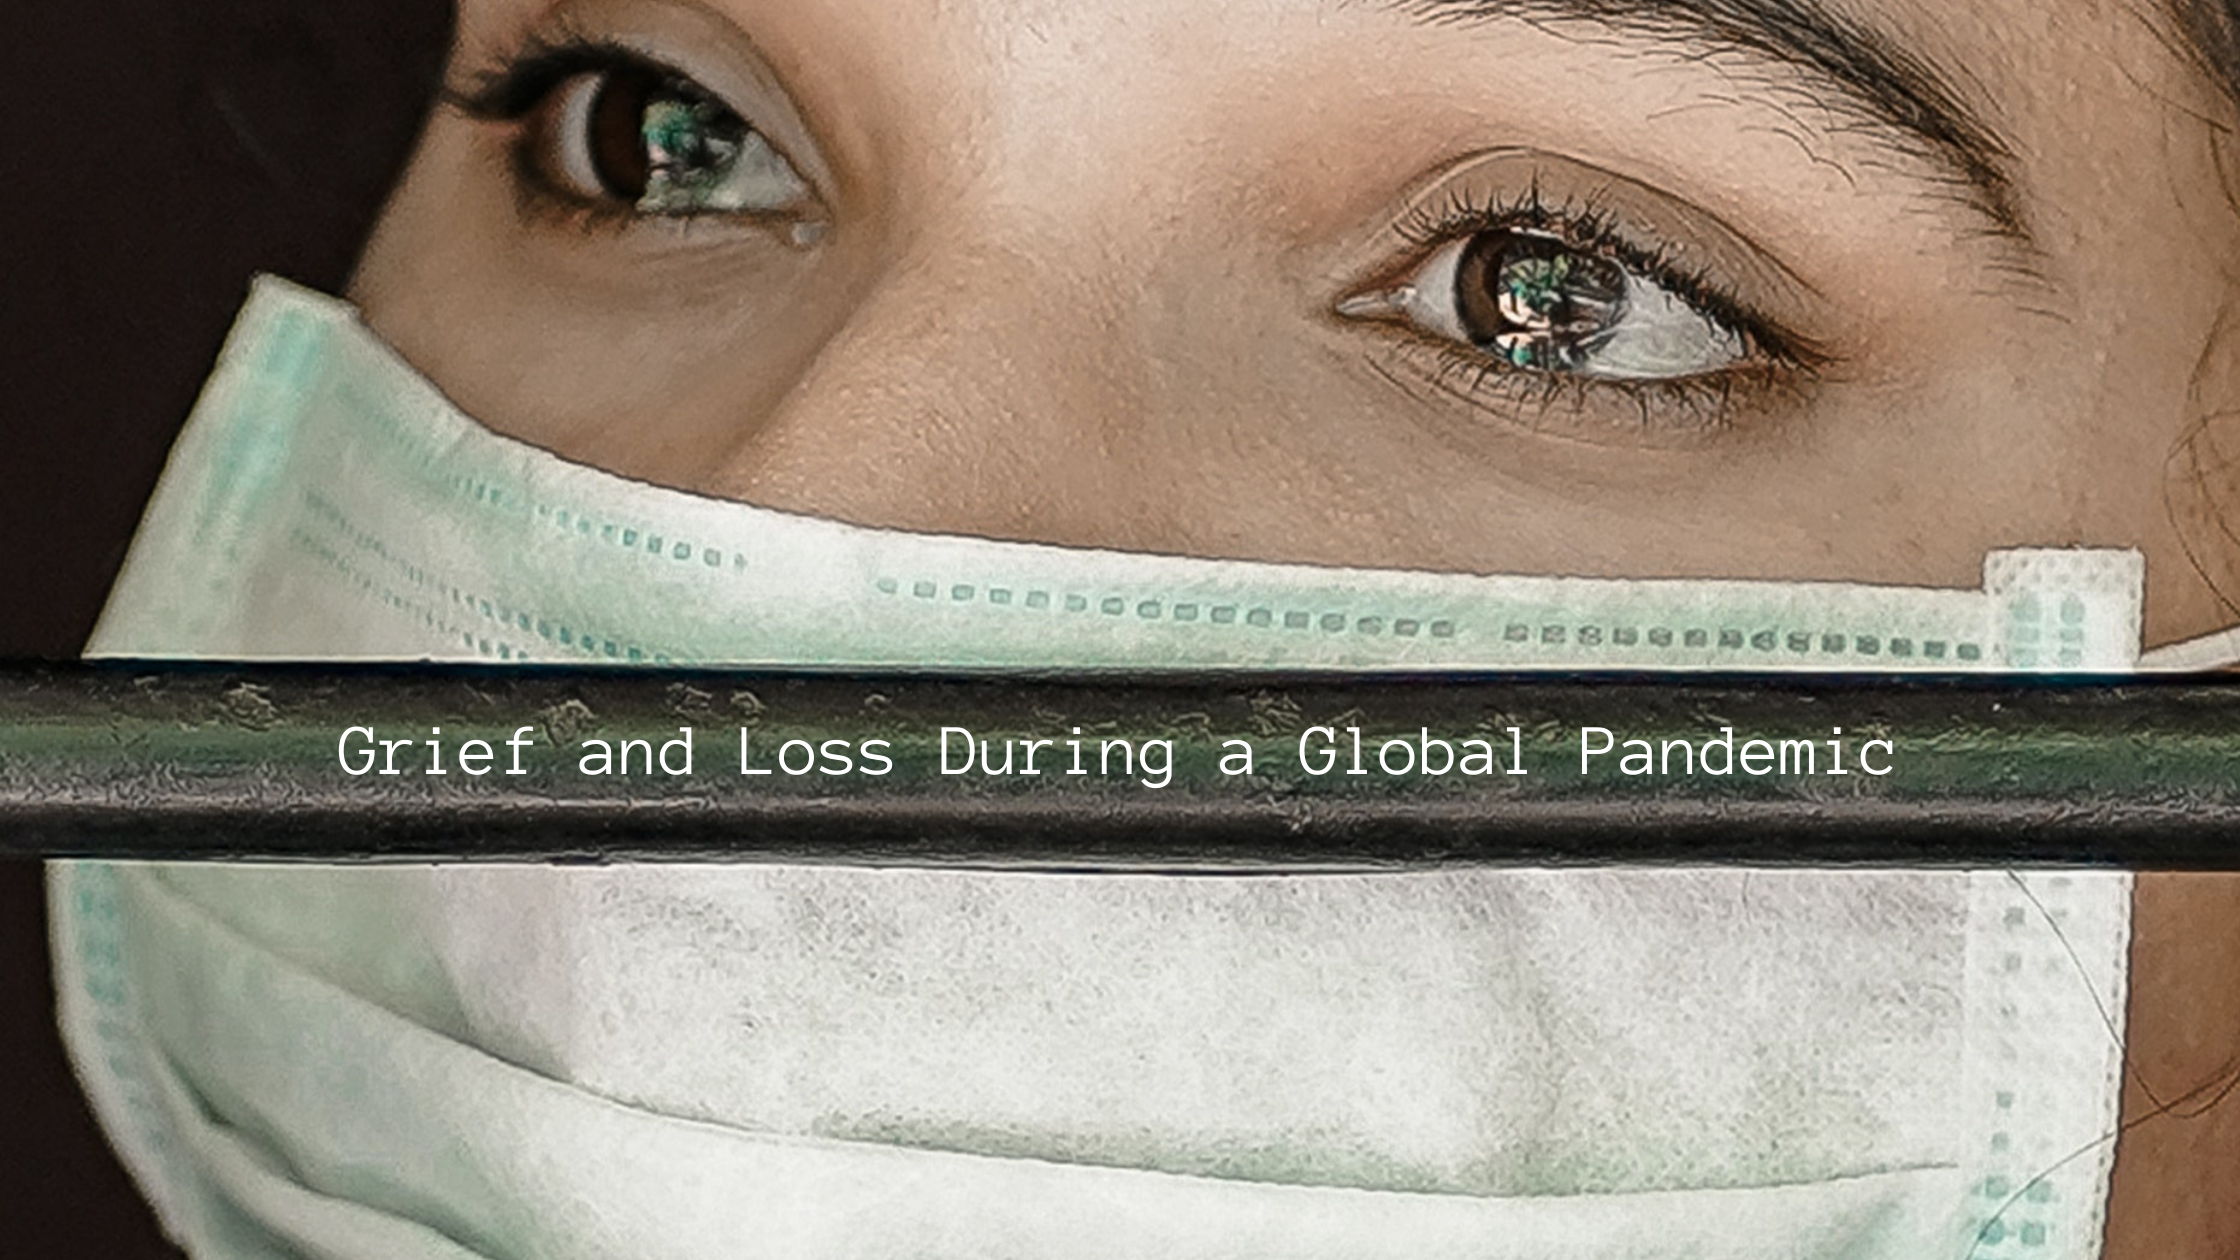 Grief and Loss During a Global Pandemic